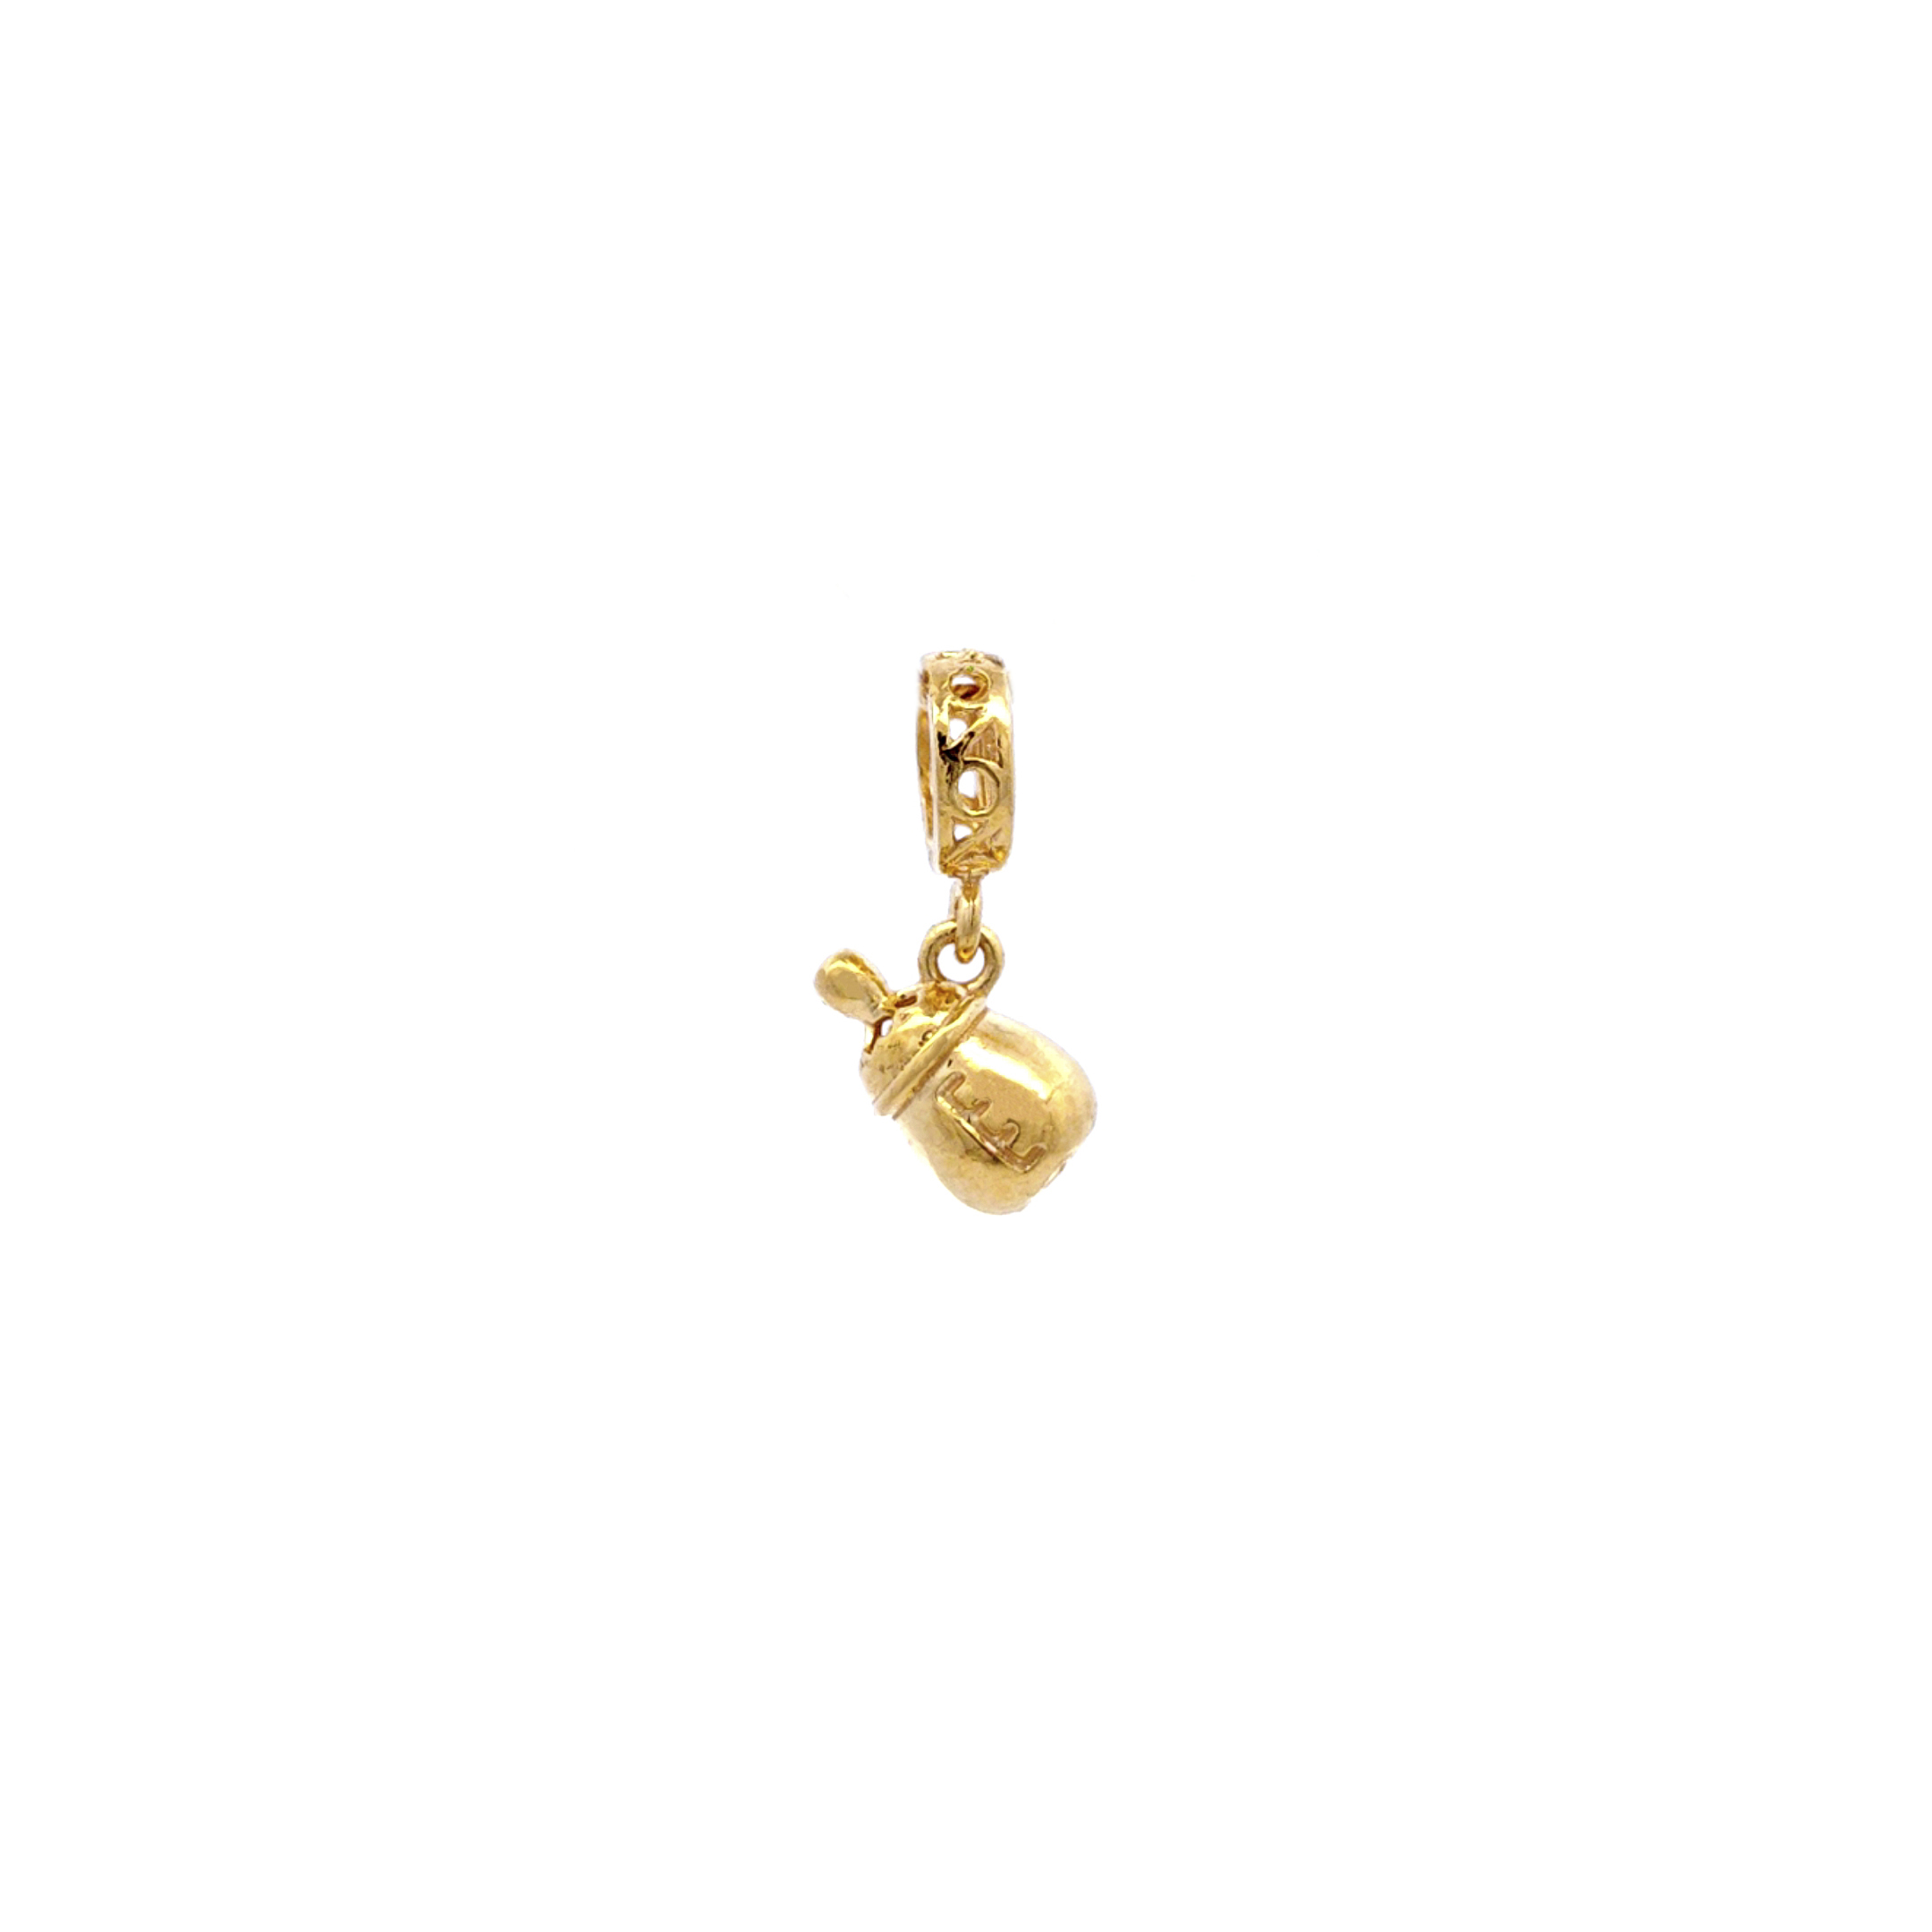 Gold Baby Bottle Charm